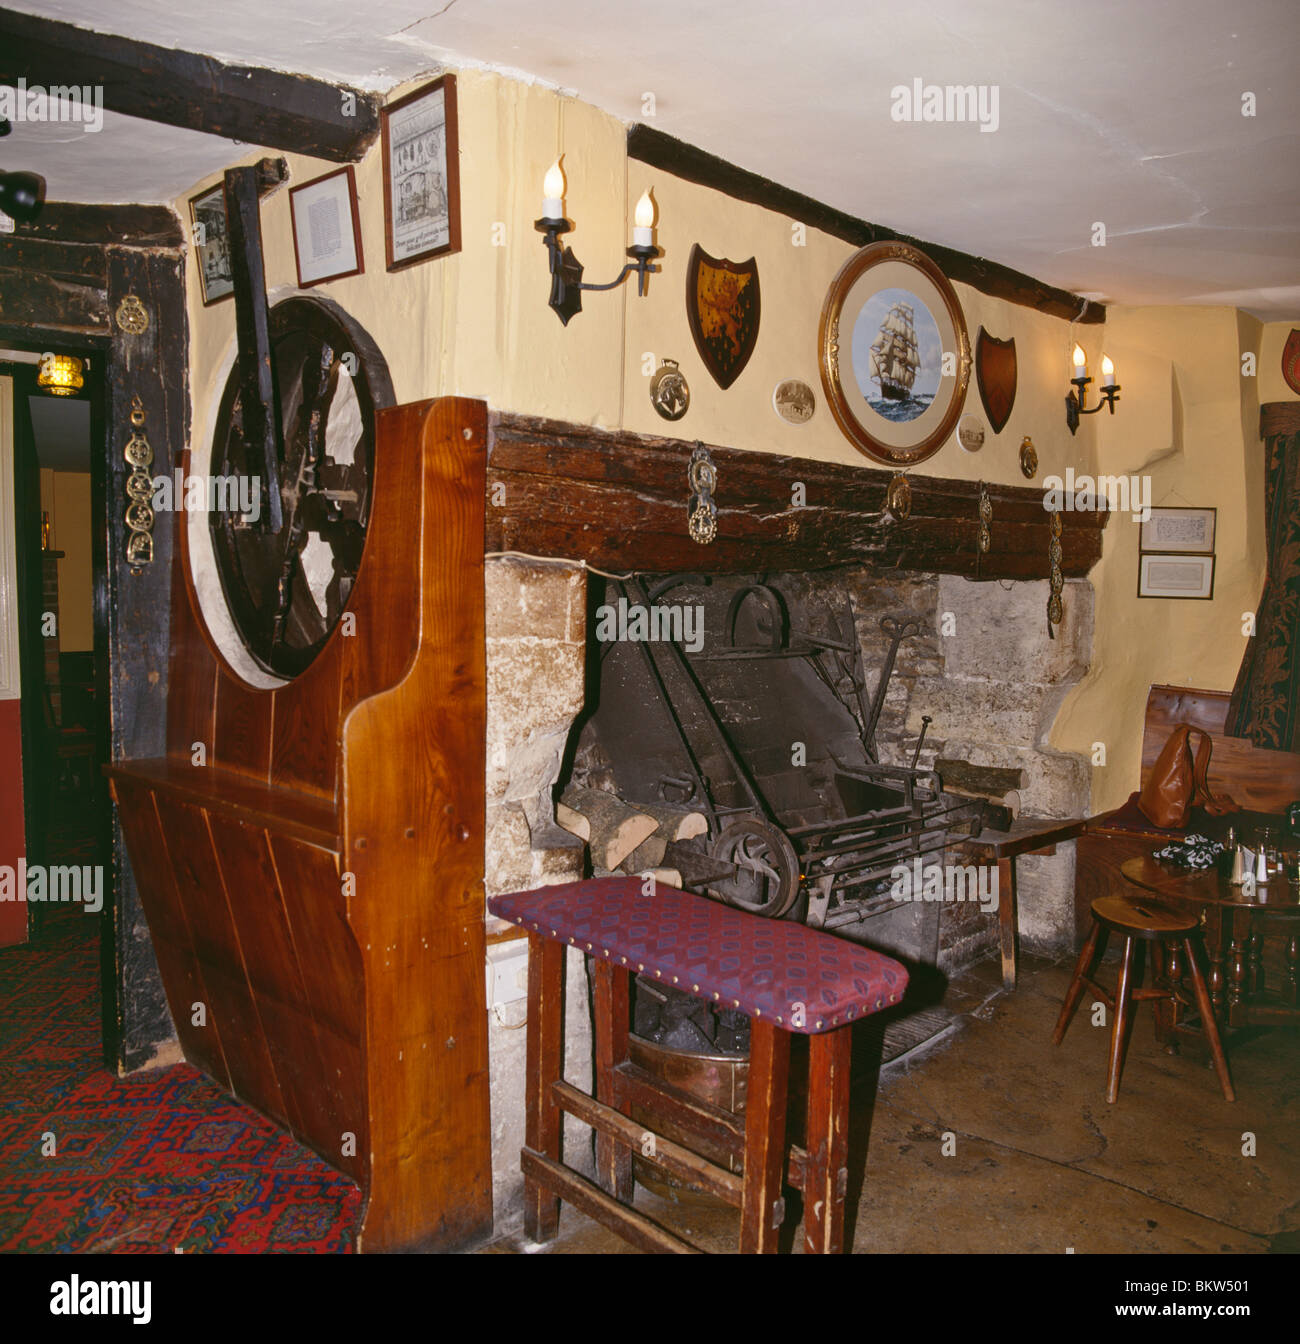 Dogwheel At The George Inn Connected To A Spit Over The Open Fire Stock Photo Alamy